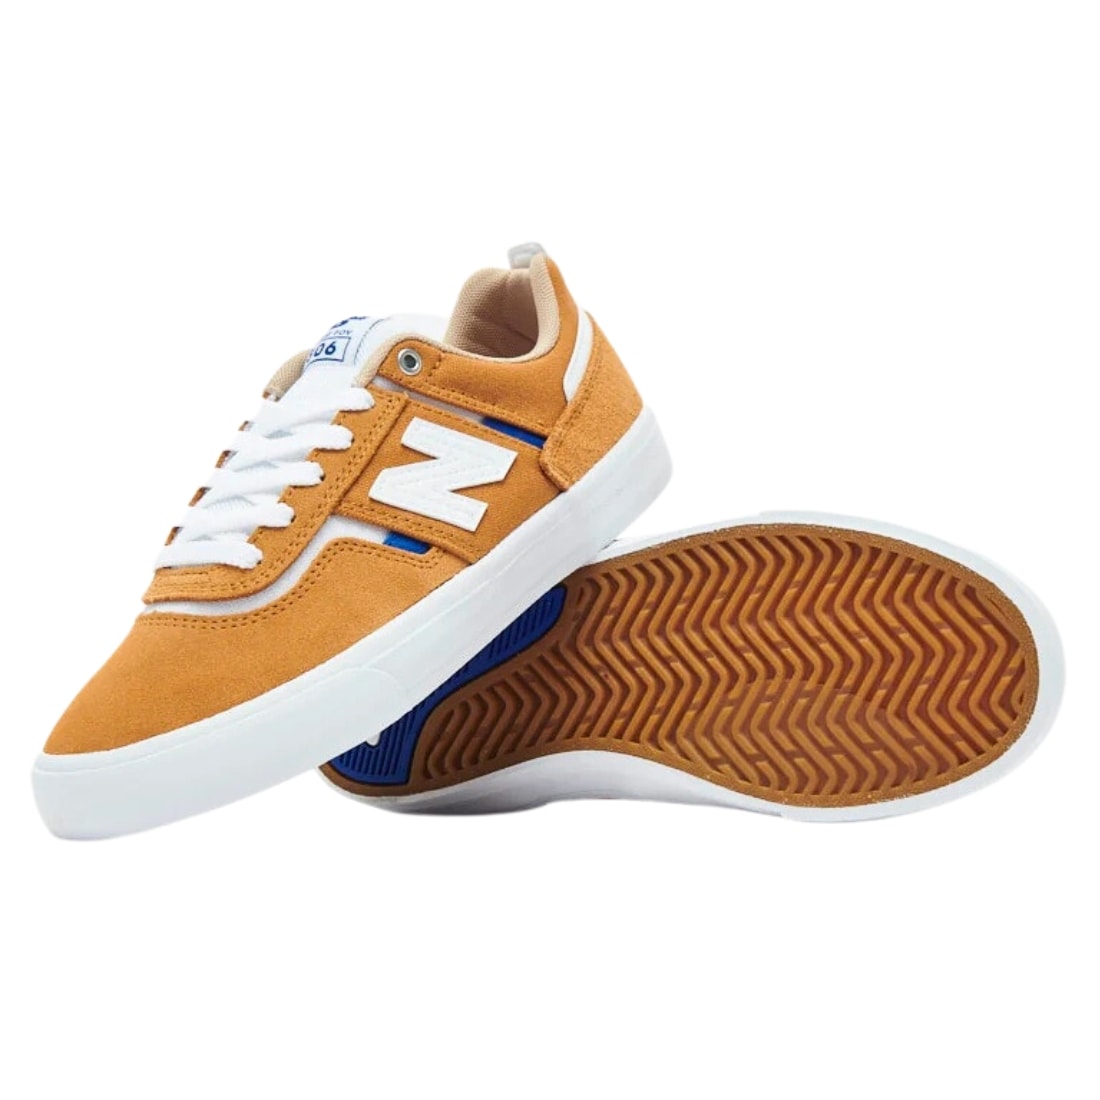 New Balance Numeric NM306 Jamie Foy Skate Shoes - Curry/White